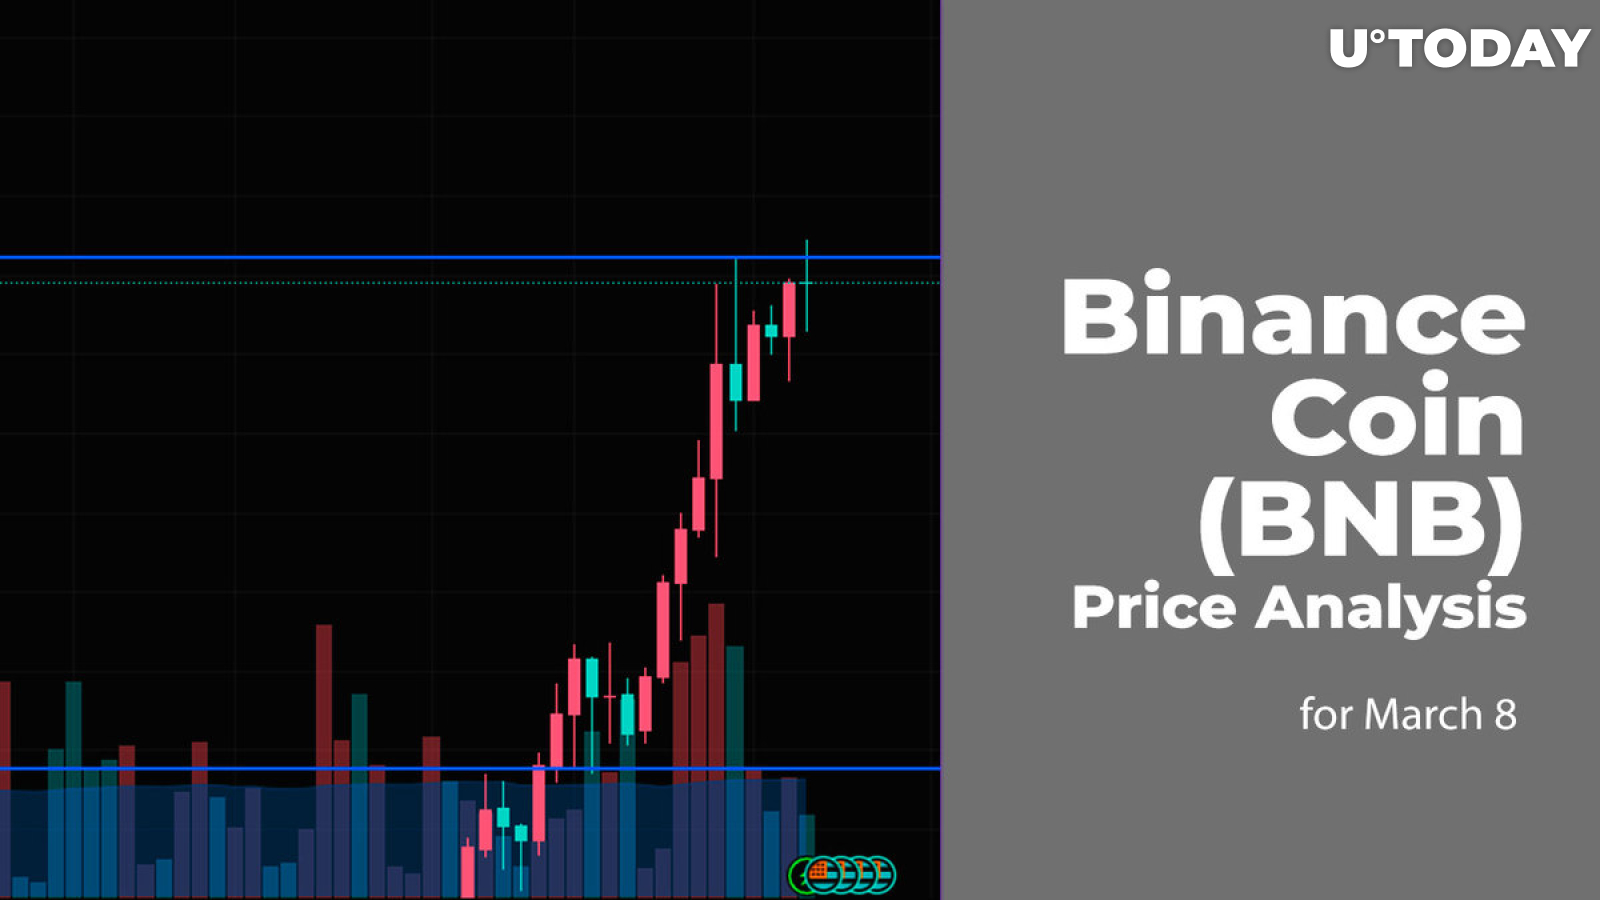 Binance Coin (BNB) Price Prediction for March 8